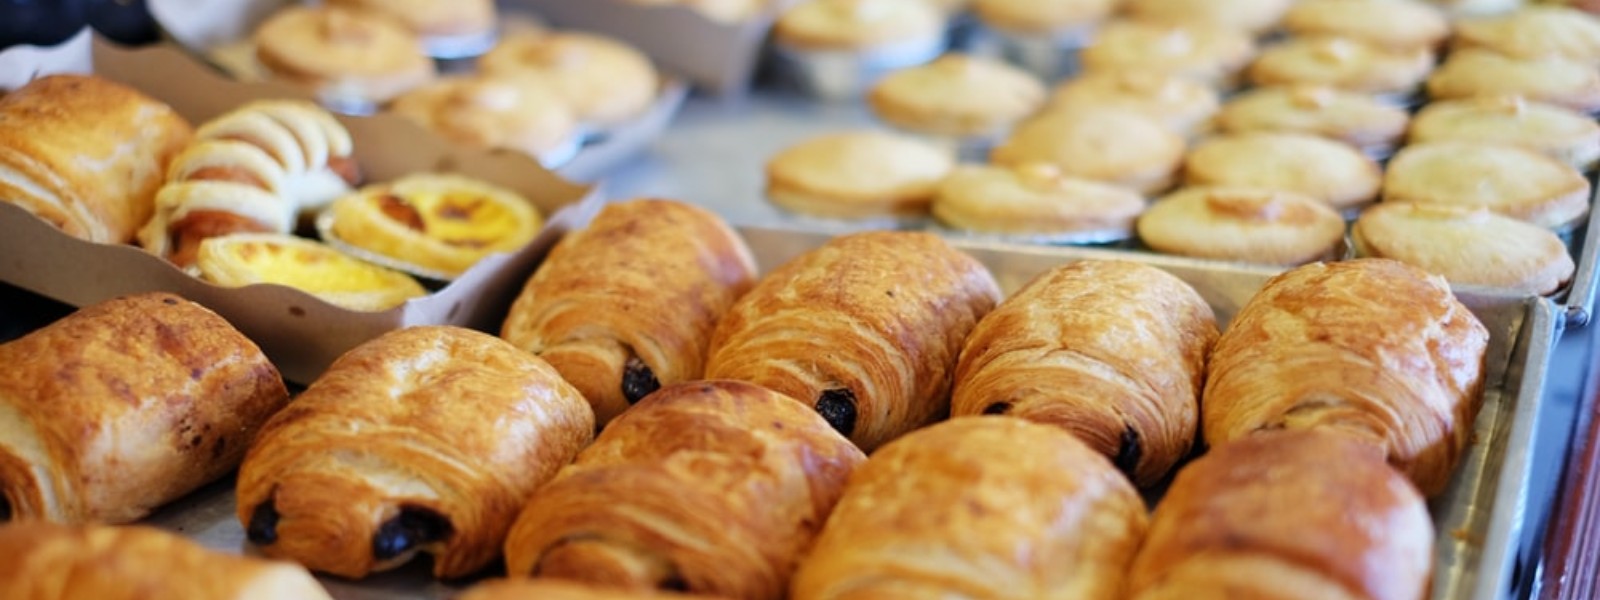 More than 1,000 bakeries closed down due to gas shortage